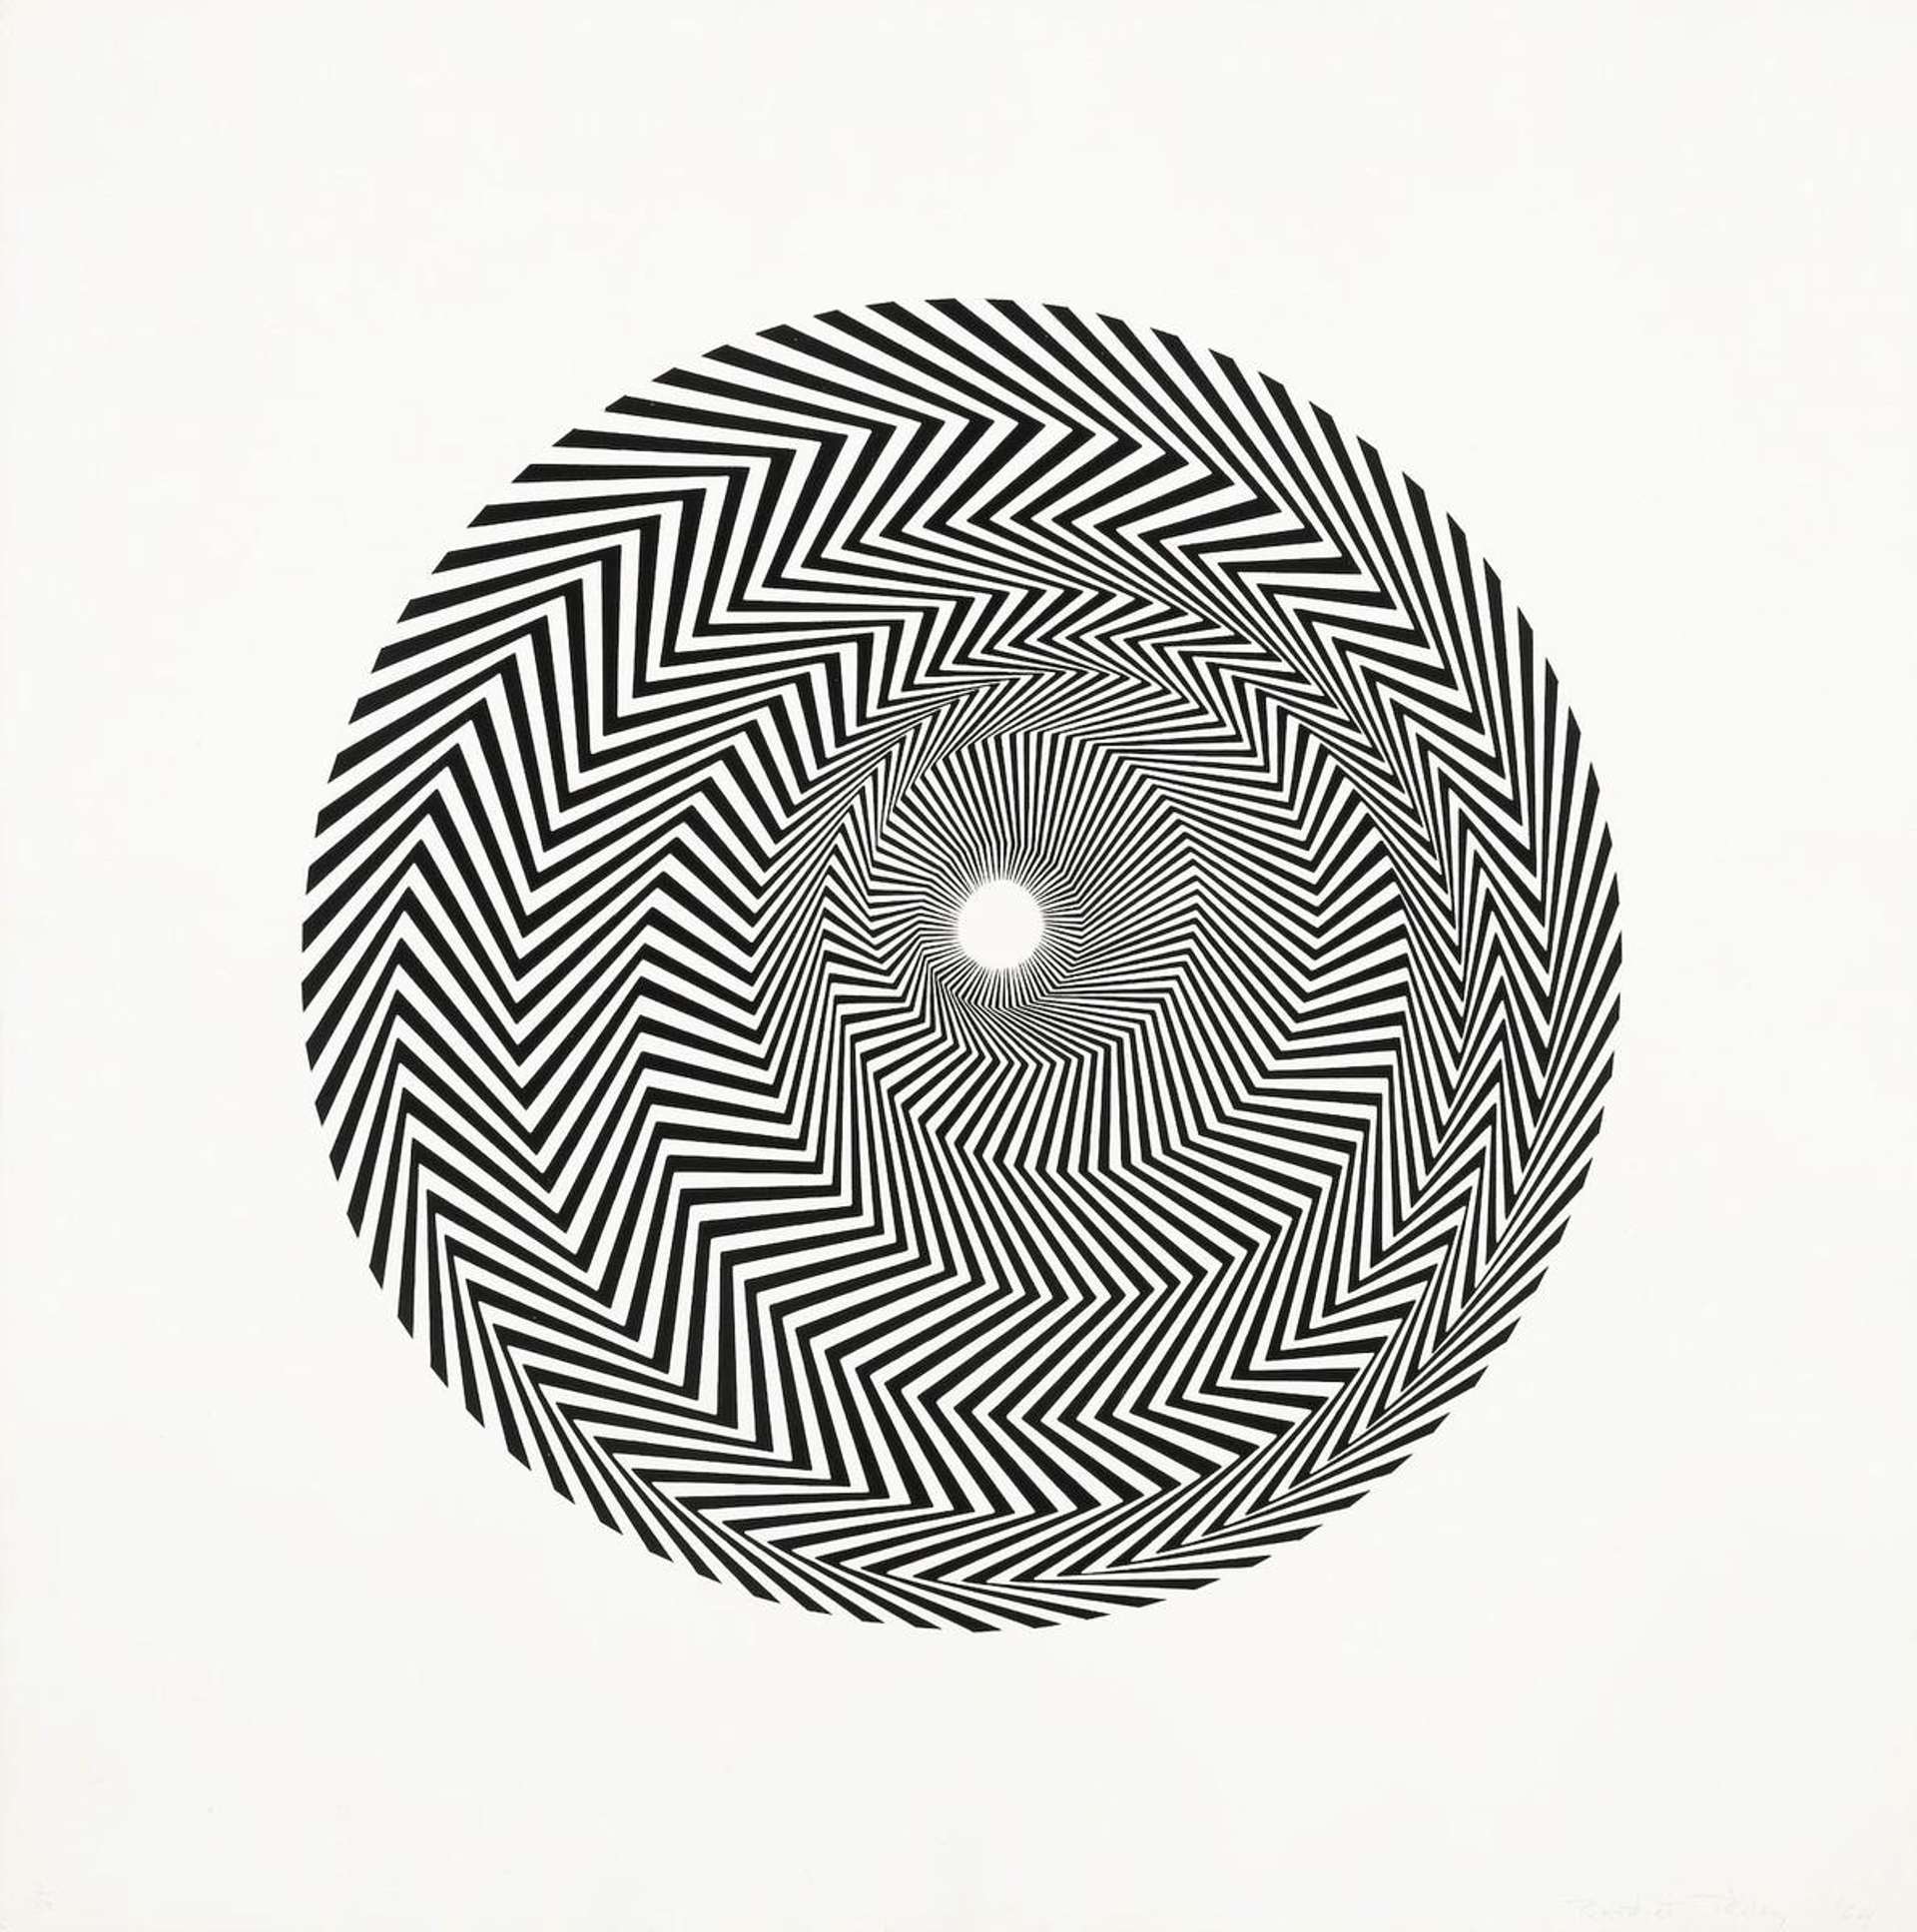 Bridget Riley’s Untitled (Based On Blaze). An Op Art screenprint of black and white lines in a circular pattern.